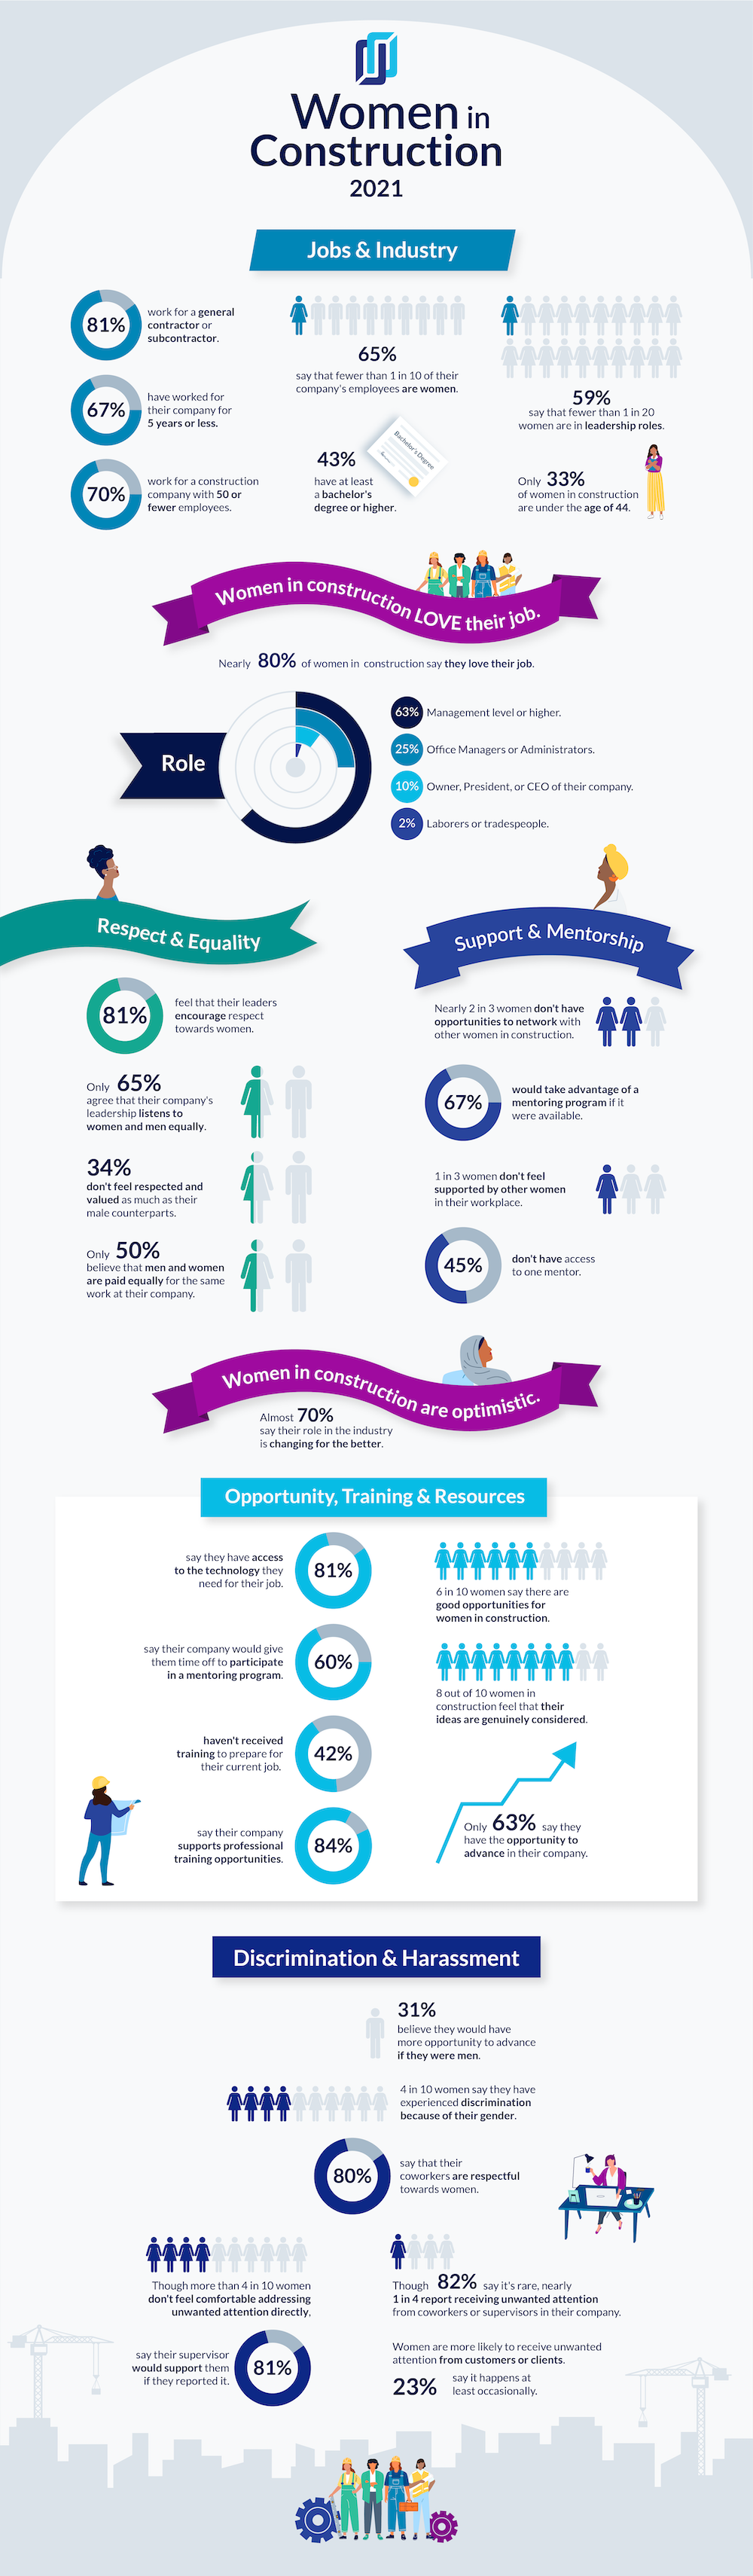 Infographic of data from the Women in Construction Survey 2021